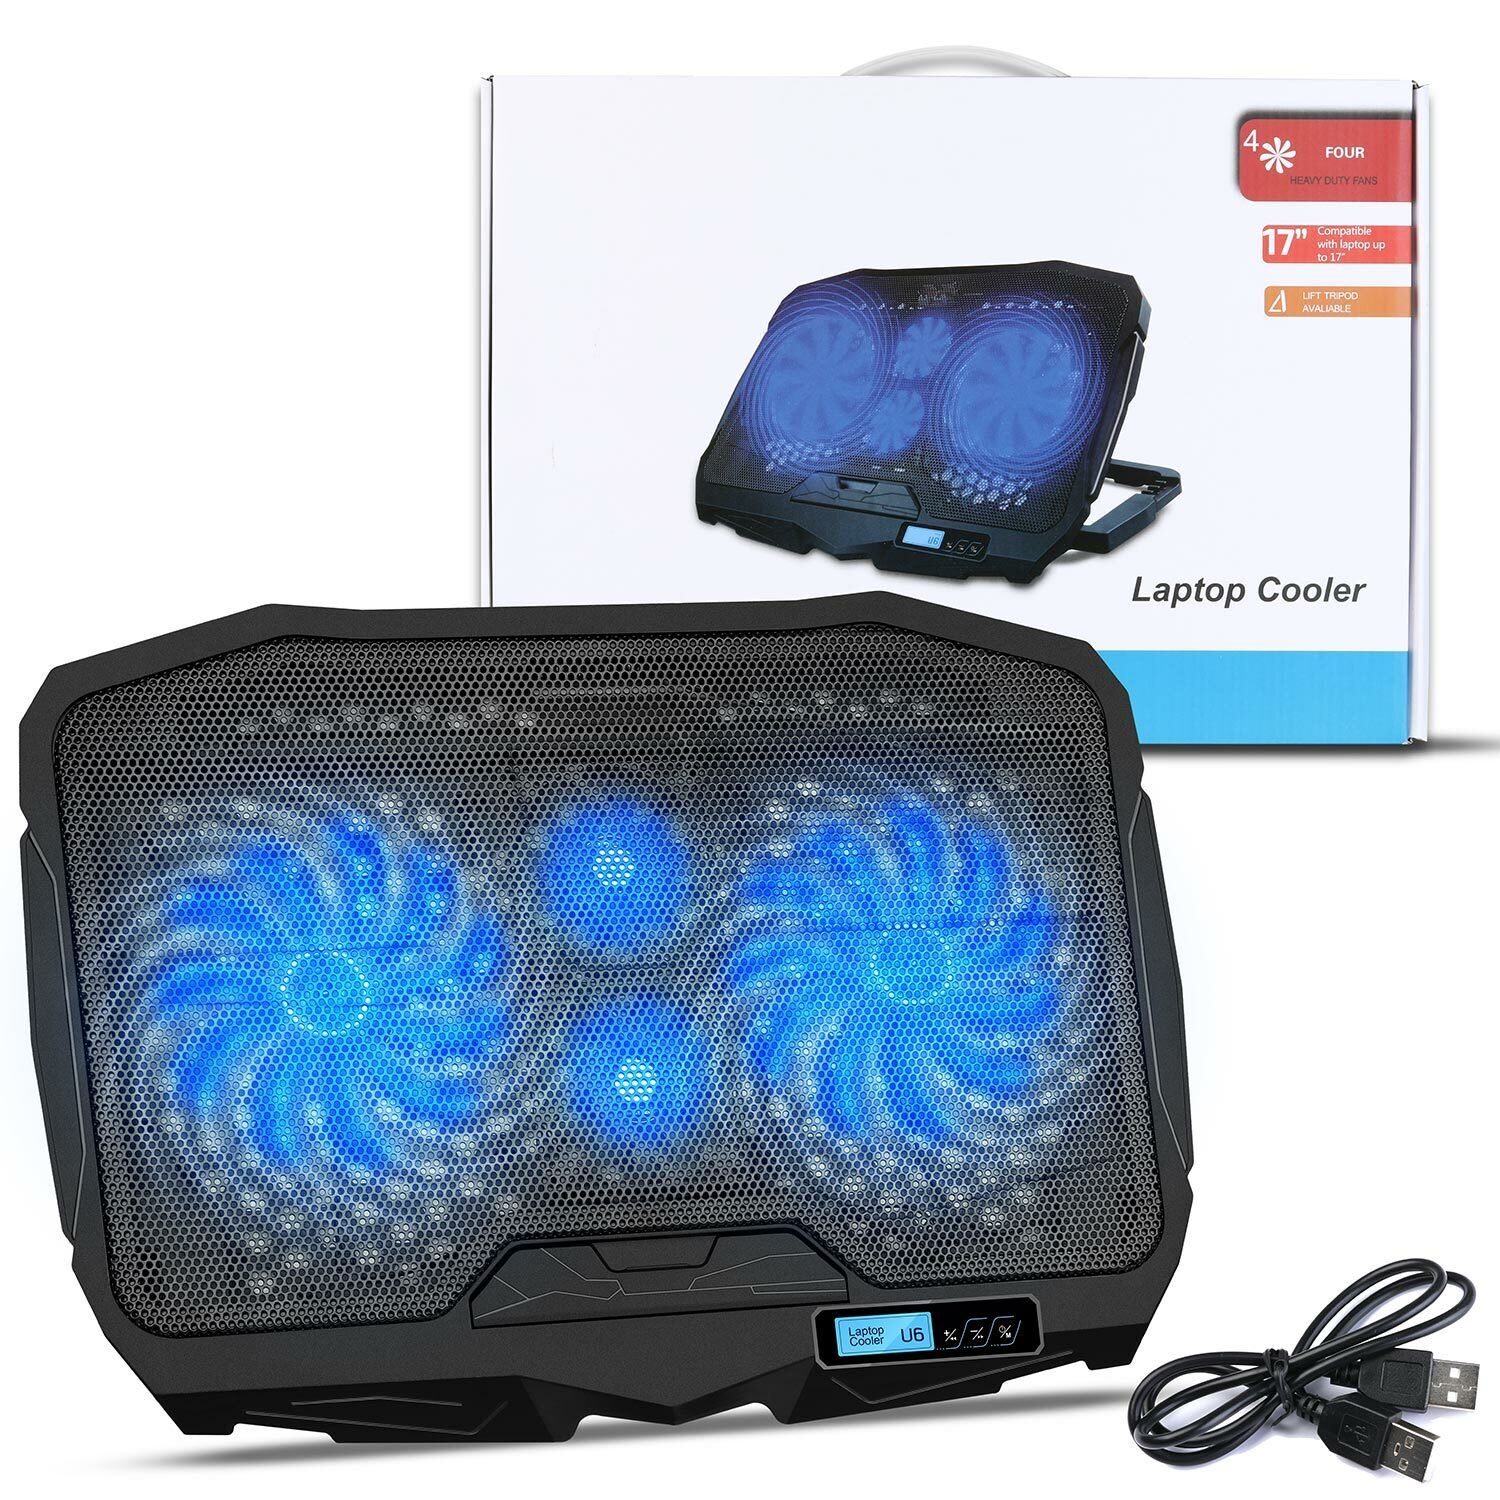 Wind Laptop Cooling Pad LED Display - 4 Blue LED Fans Light Quiet Rapid Cooler YELLOW-PRICE YP-LCP-45 - фотография #12